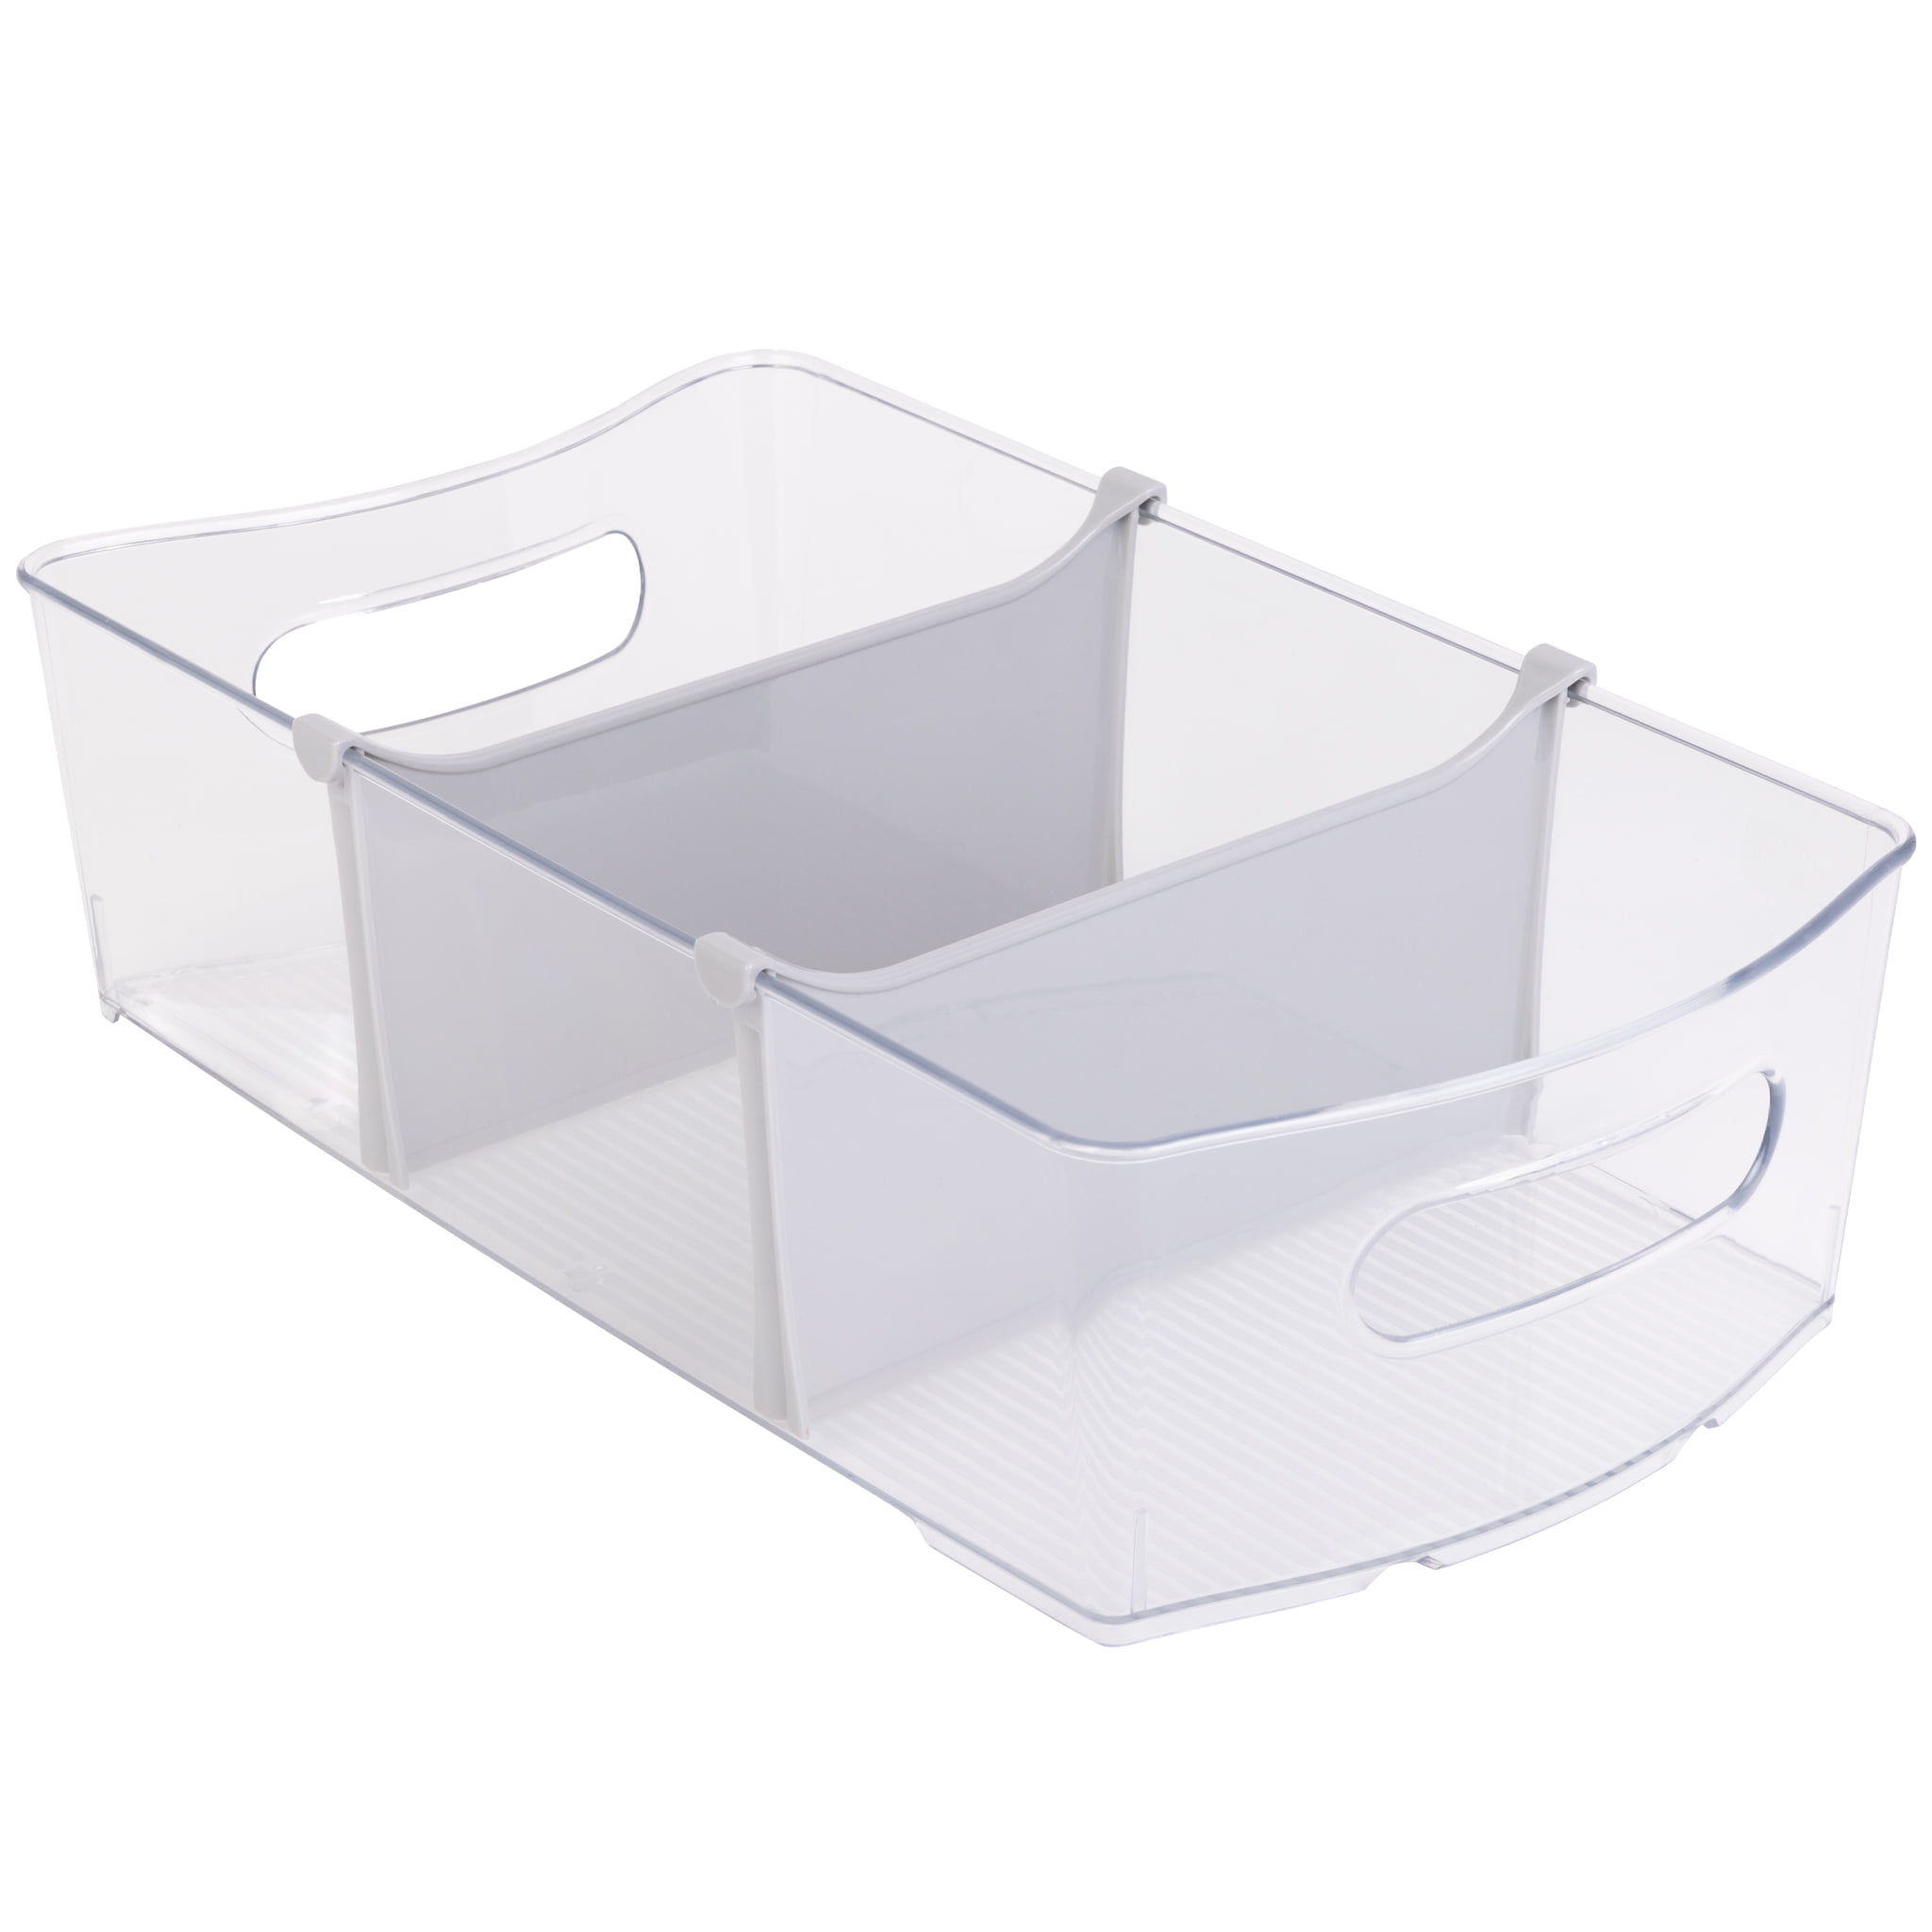 FLEXIMOUNTS Set of 1 Foldable Plastic Storage Bins 8.4Gal, Milky White  Stackable Closet Organziers with Lids and Wheels